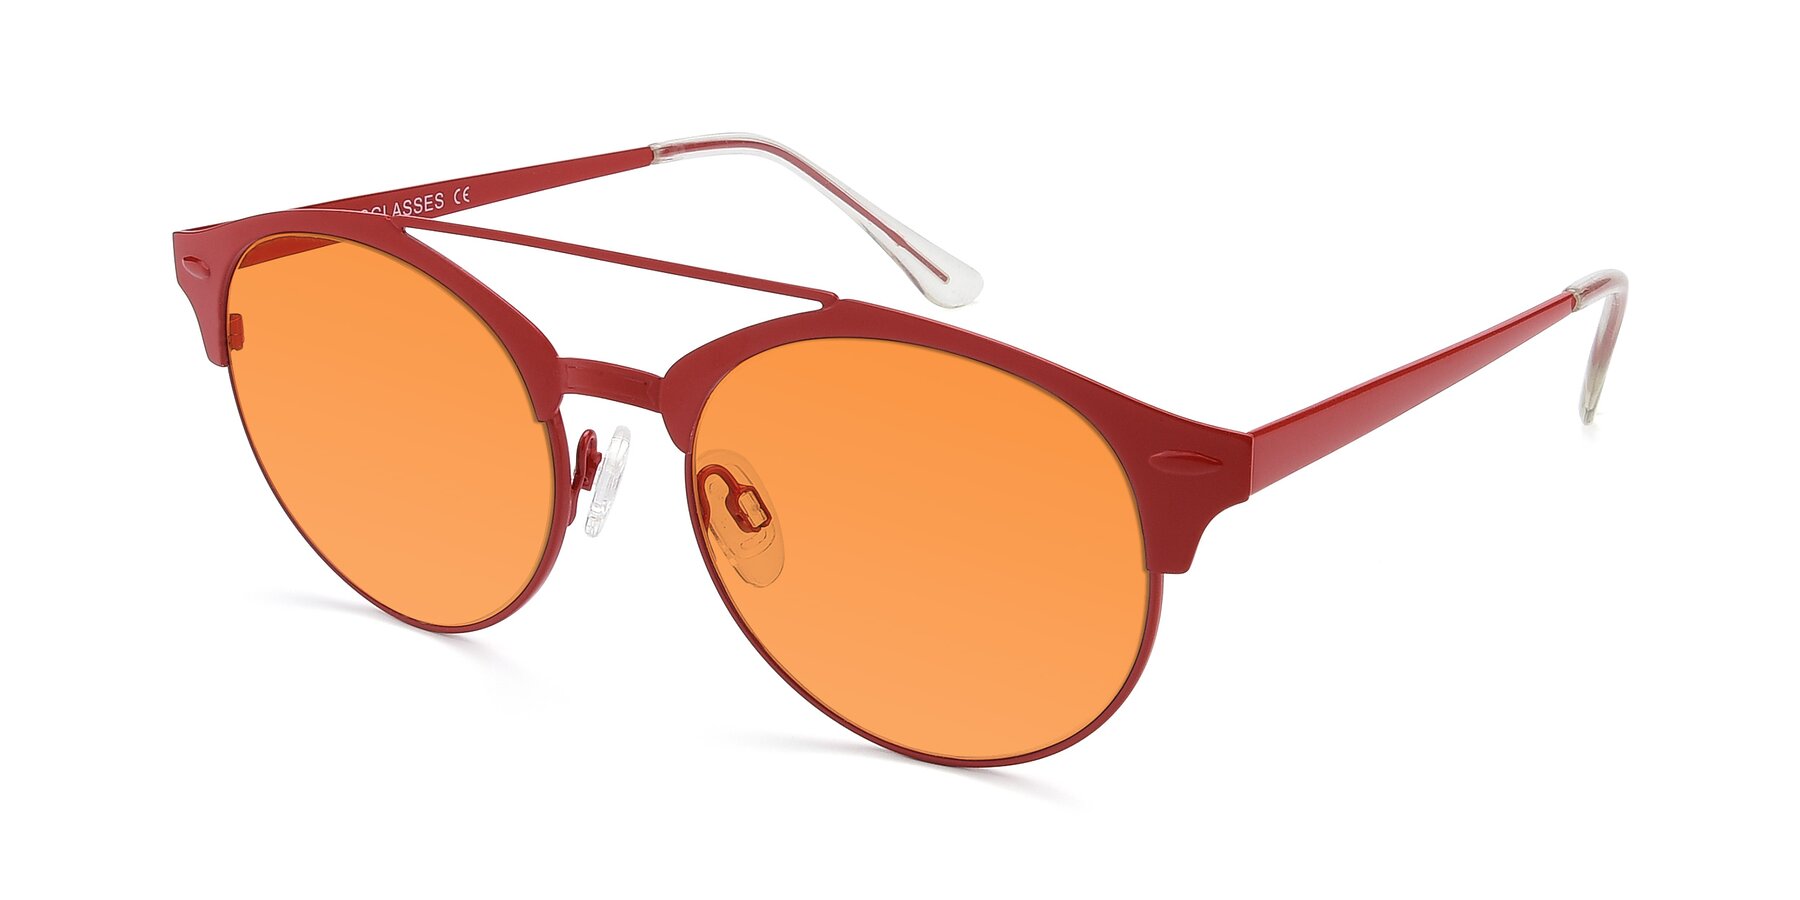 Angle of SSR183 in Red with Orange Tinted Lenses